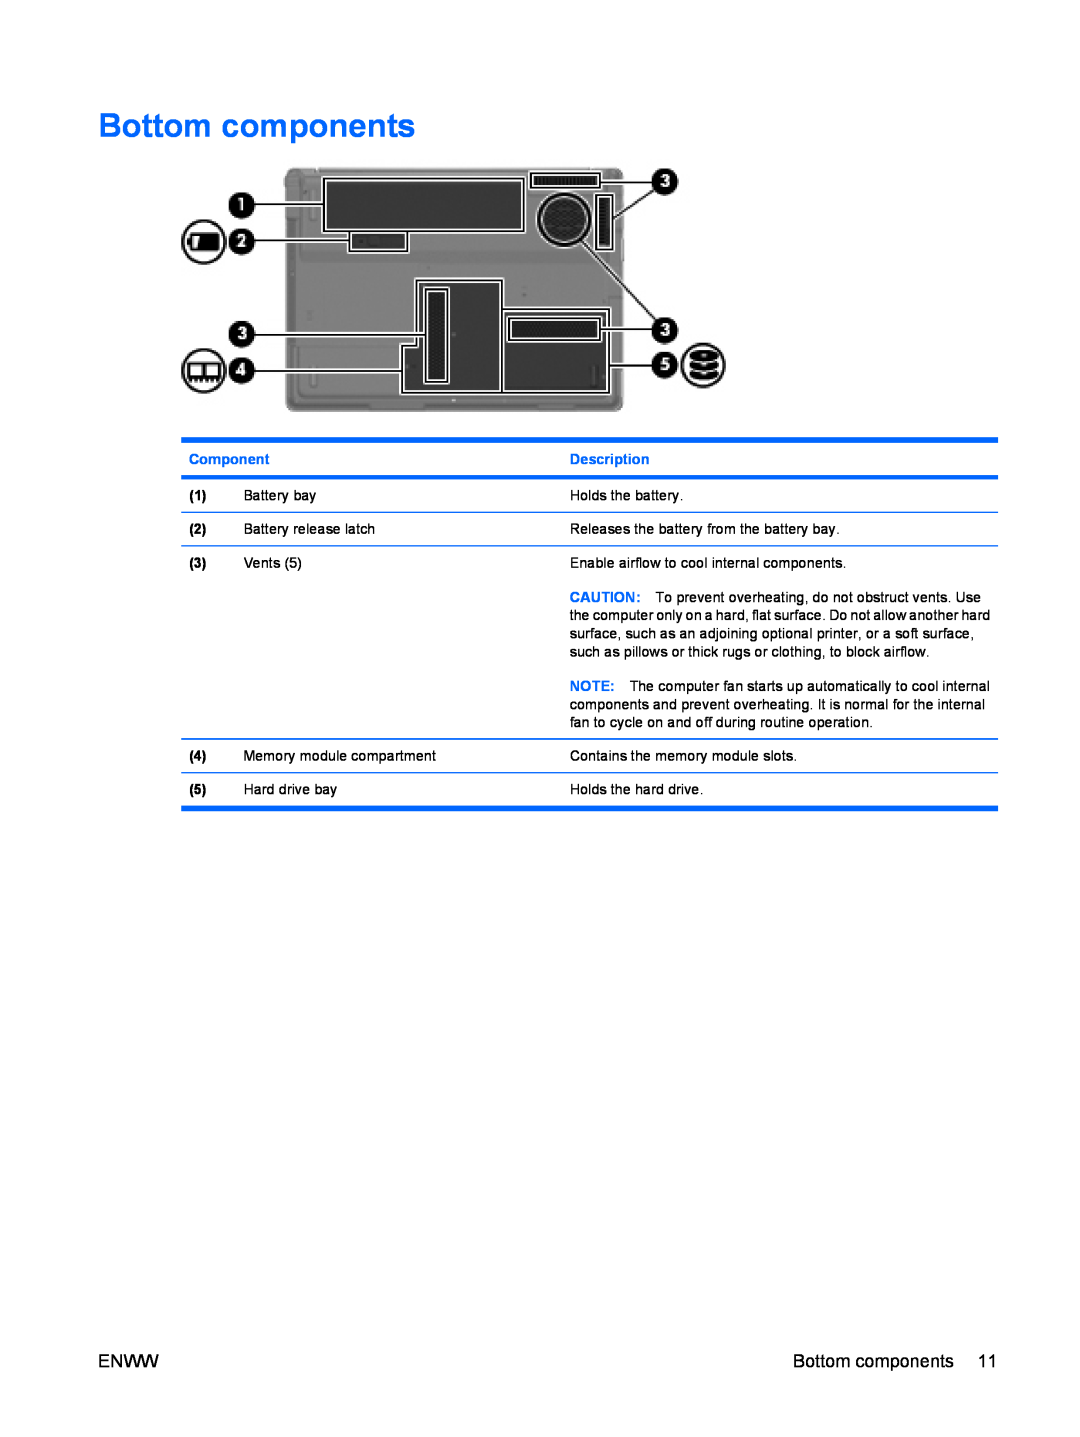 HP V6611TU Bottom components, Component, Description, the computer only on a hard, flat surface. Do not allow another hard 